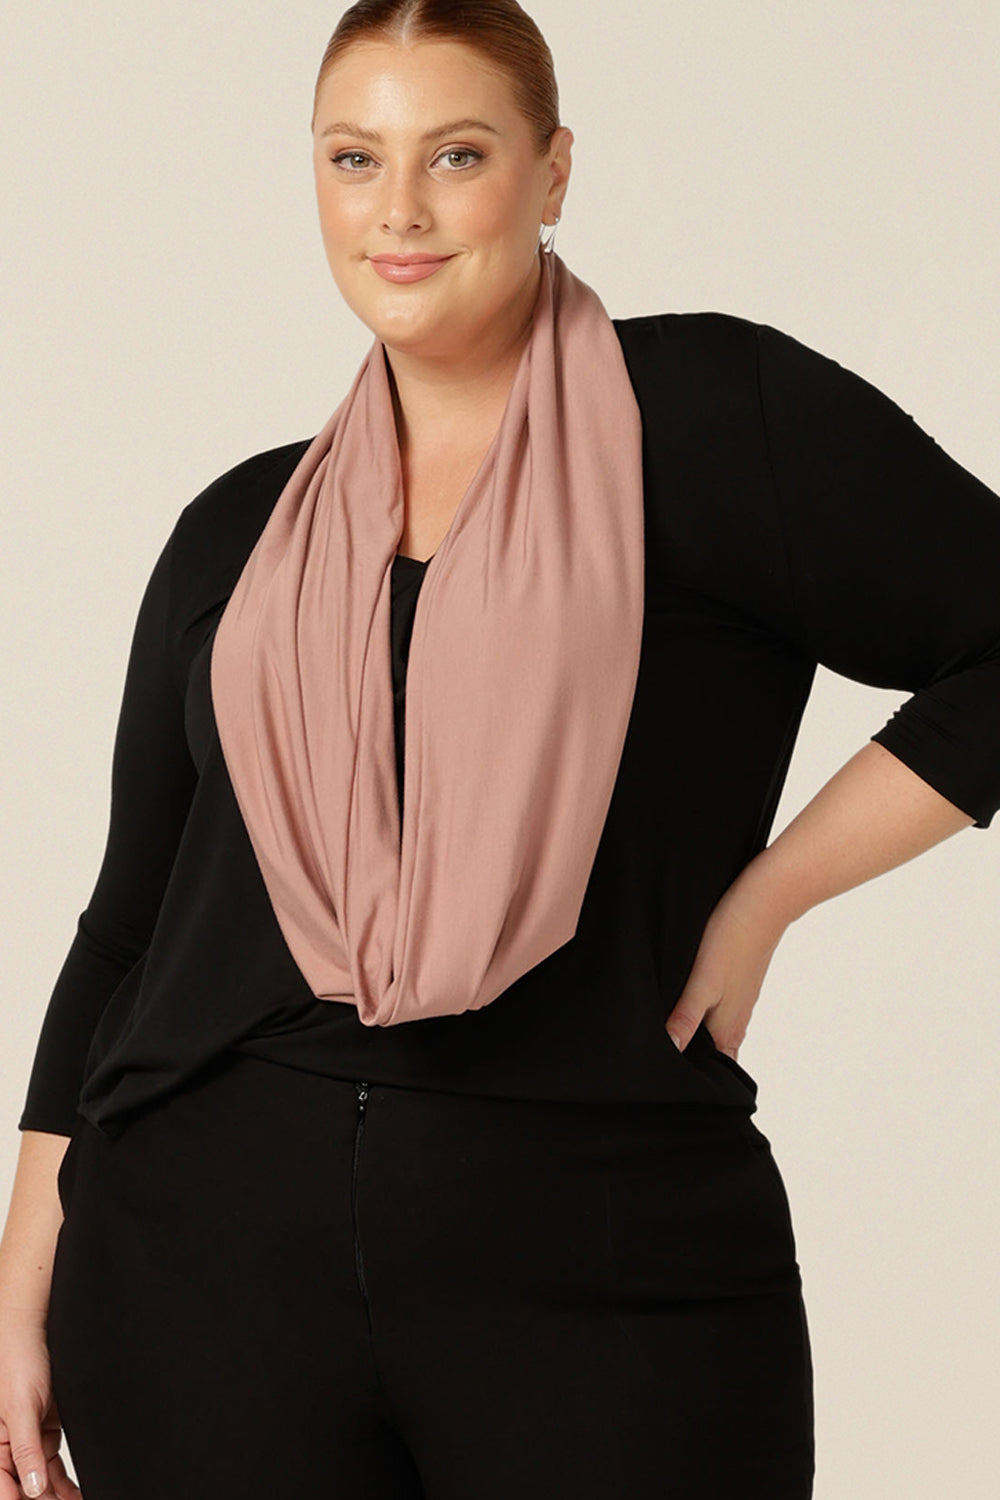 complete your capsule wardrobe for work, travel and play with this Infinity Scarf in luxurious and soft cinnamon bamboo jersey.